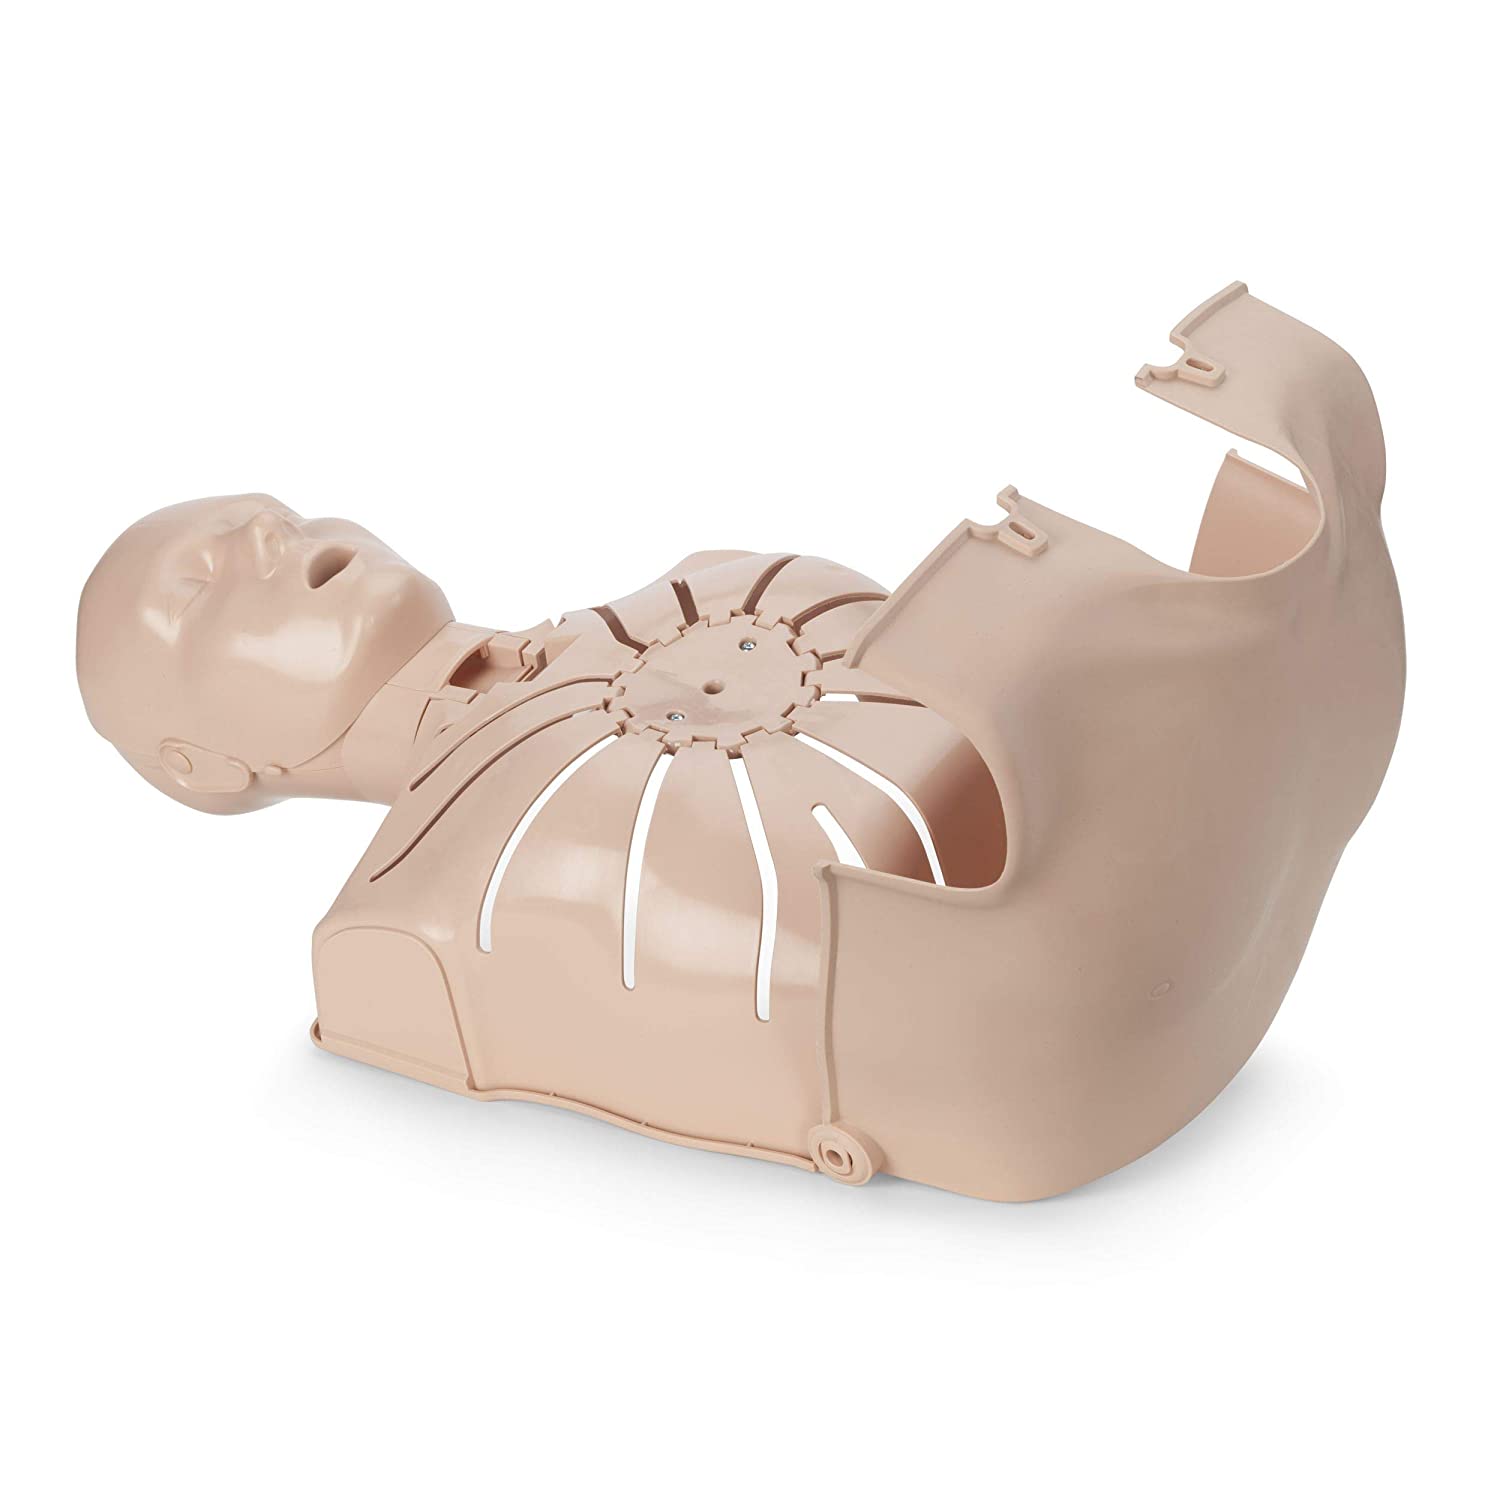 TEACH YOURSELF CPR WITH THIS DUMMY